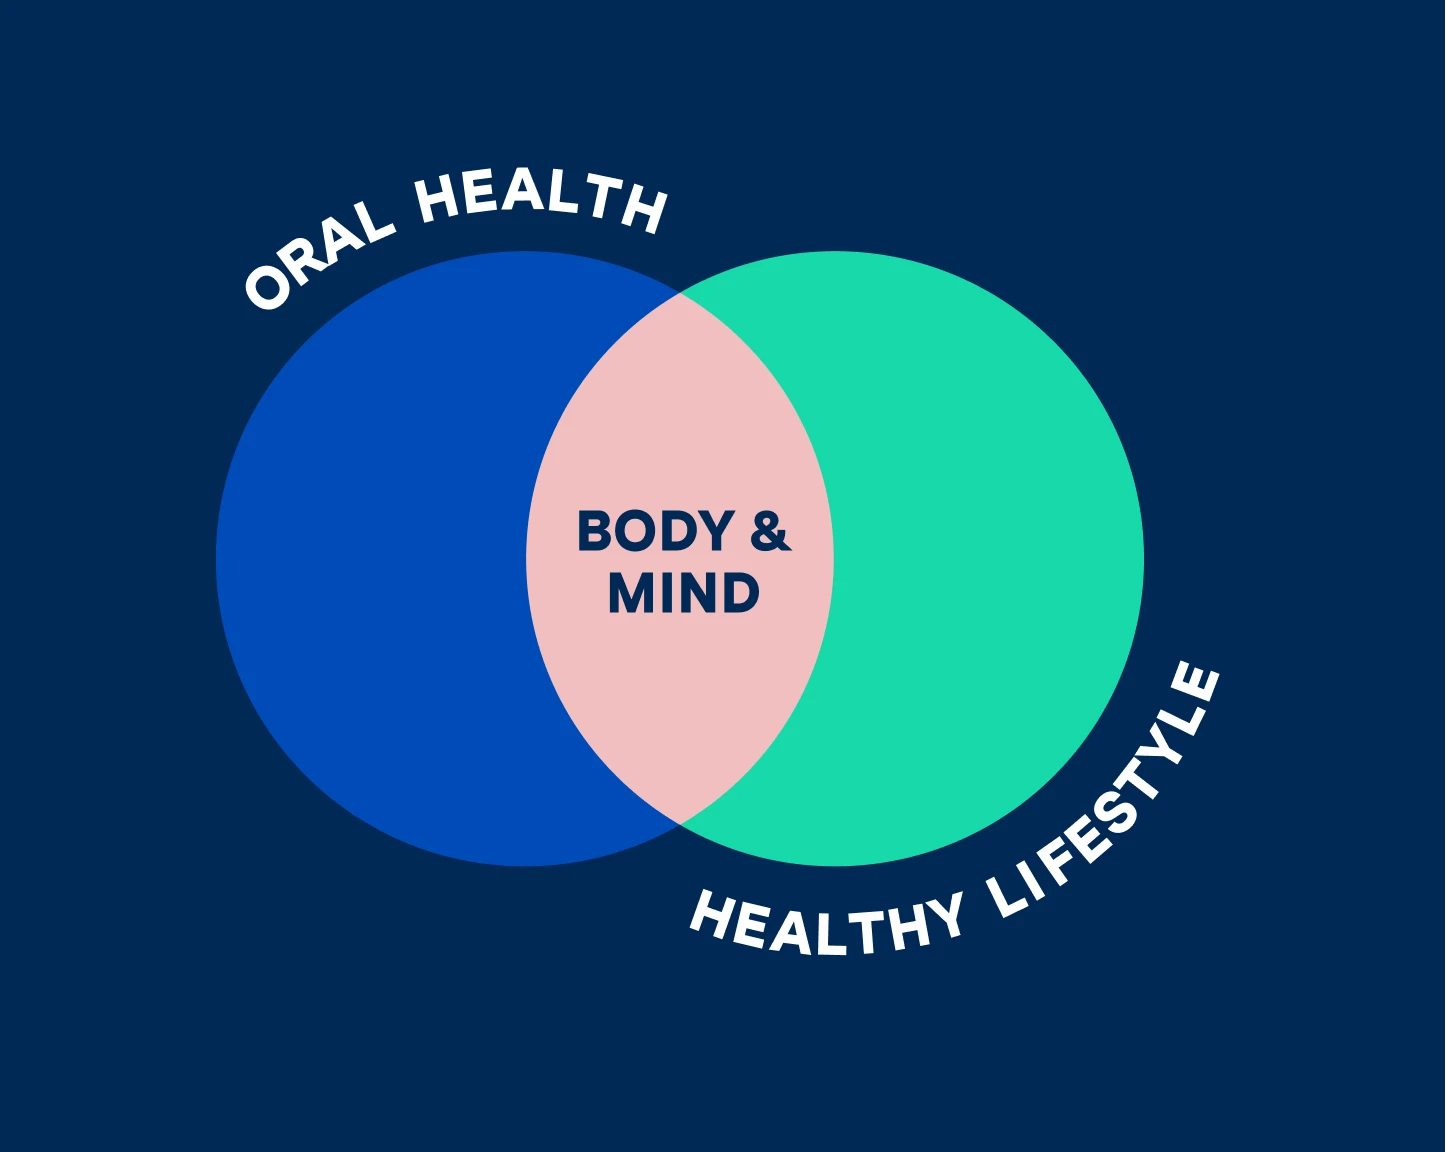 The graphic image depicts two circles, one colored blue representing oral health and the other colored green representing a healthy lifestyle. The circles merge in the middle, creating a peach color that represents the link between oral health and overall health. The image suggests that maintaining good oral hygiene contributes to a healthy body and mind, leading to sound overall health.